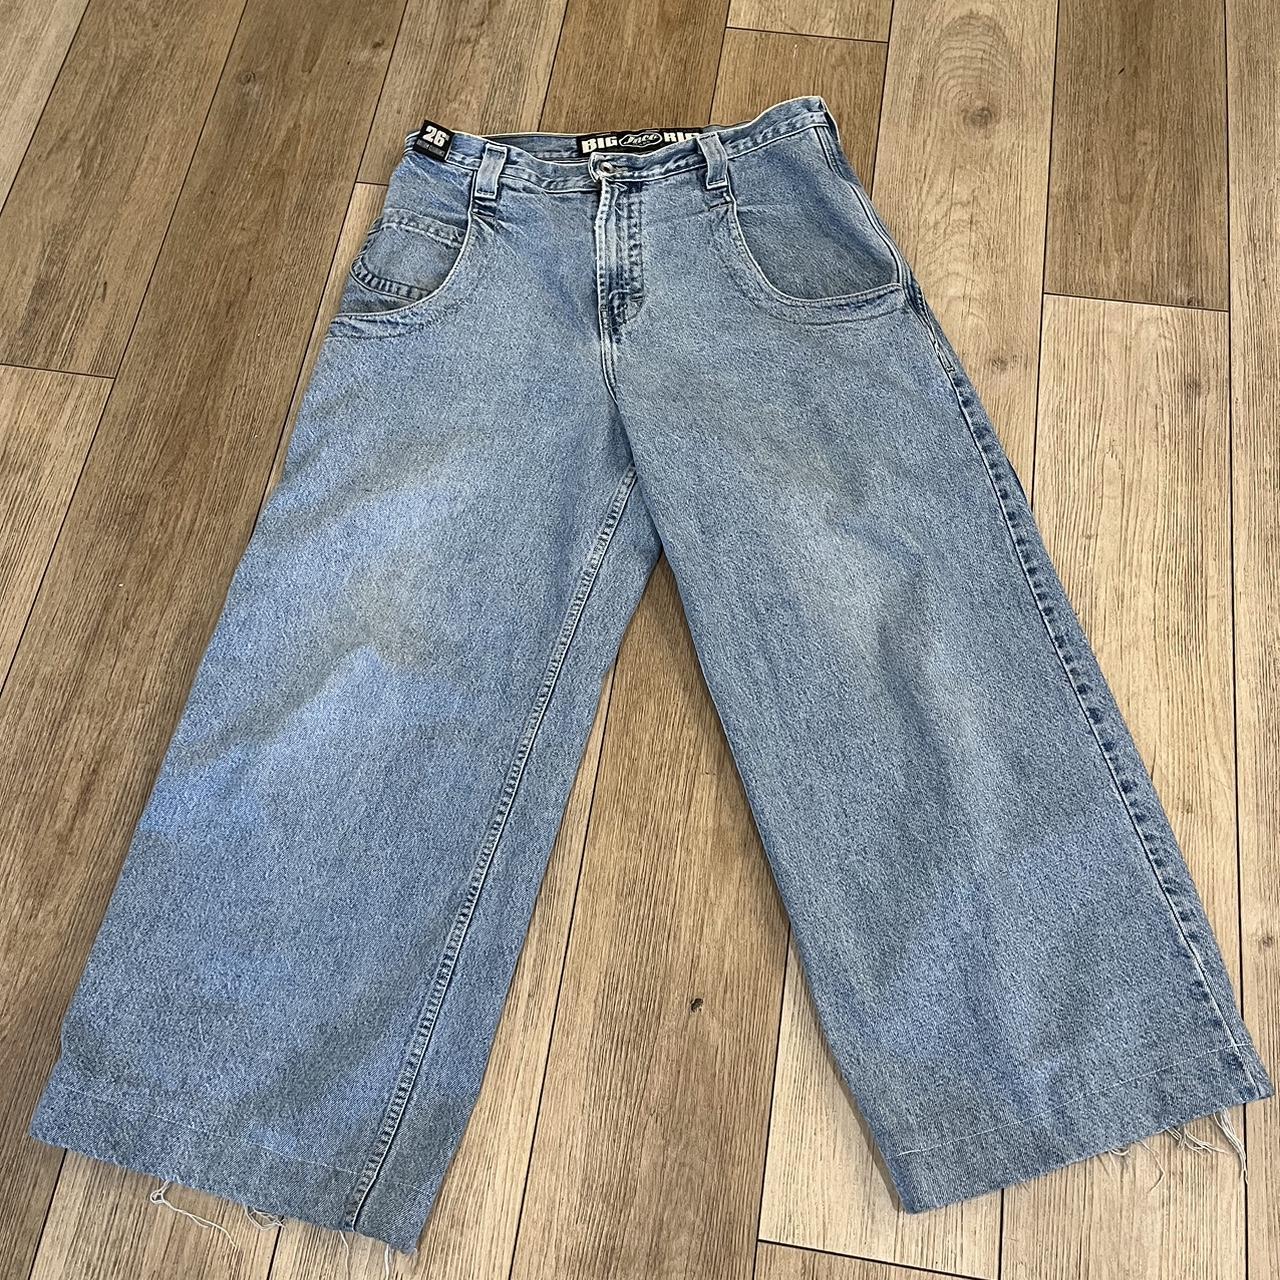 MESSAGE BEFORE BUYING jnco big rig fit absolutely... - Depop